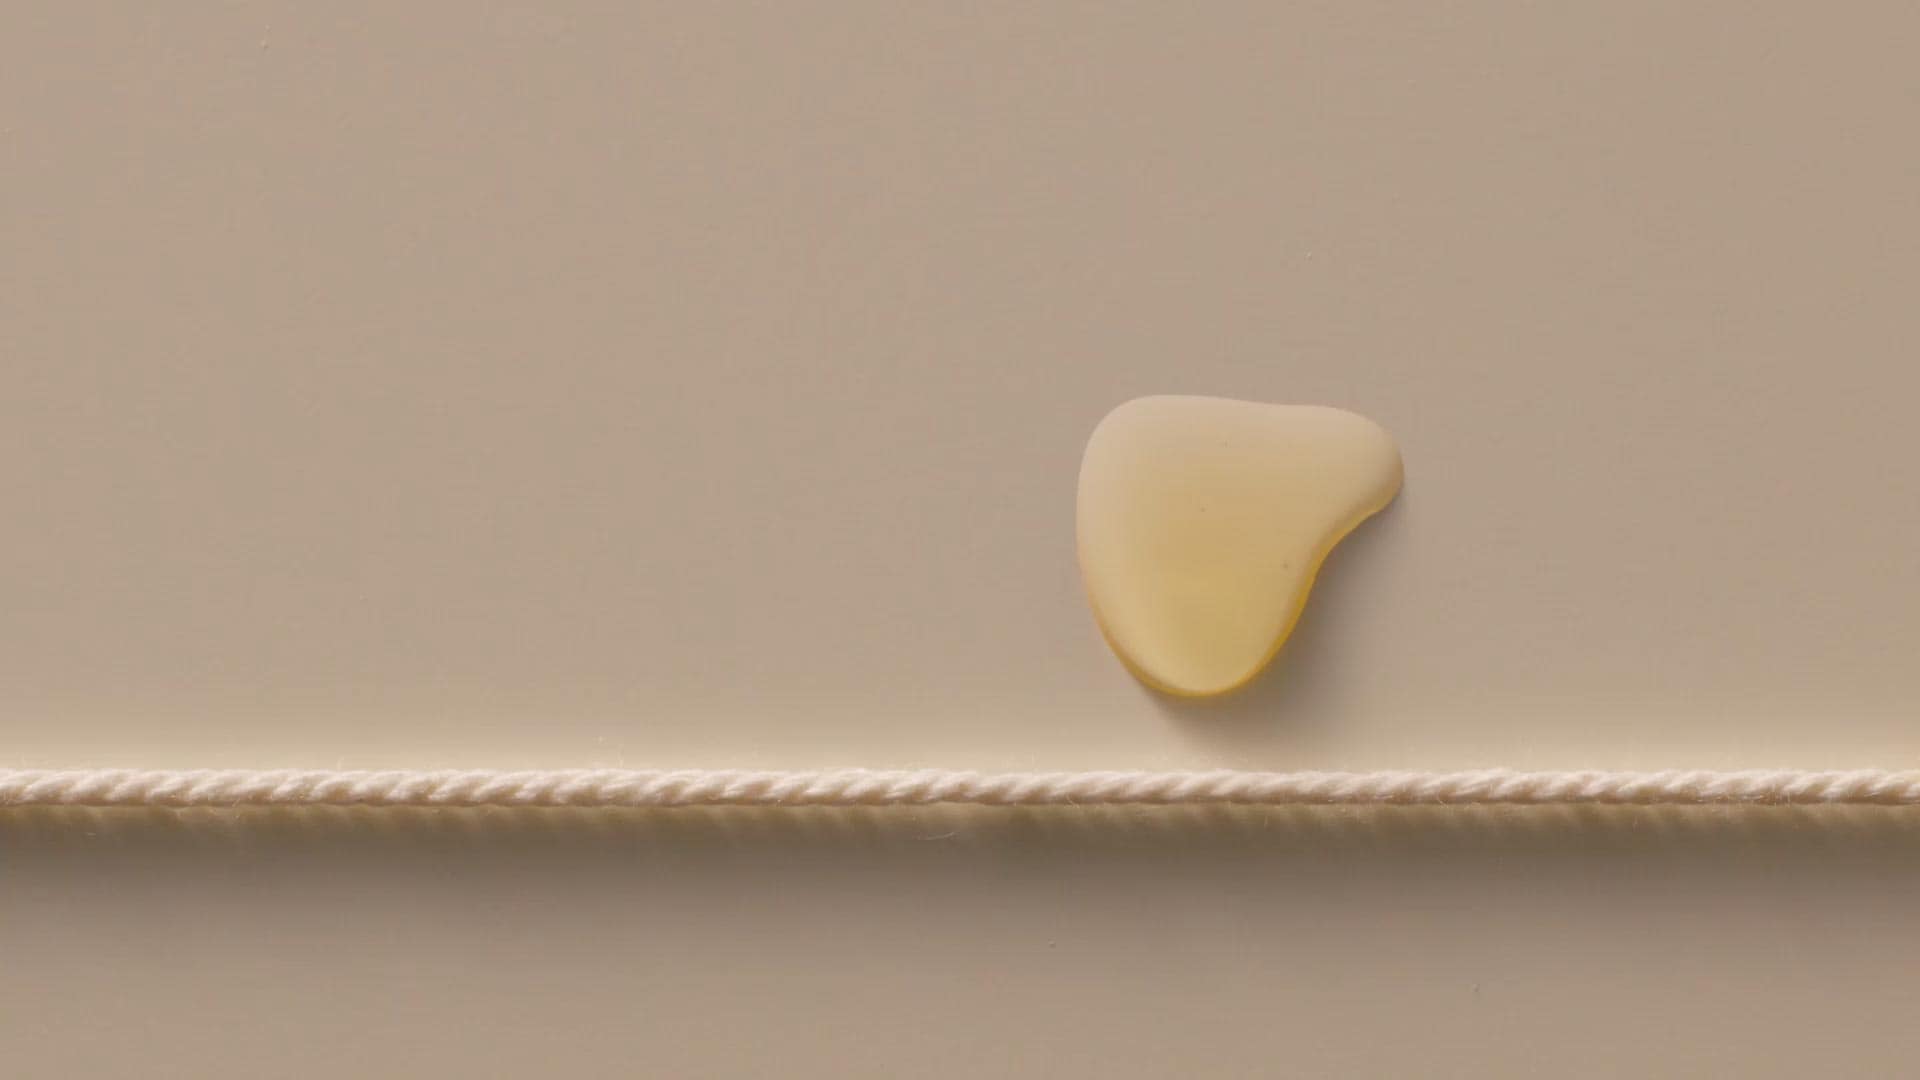 A drop of serum dripping on a beige surface above a white thread